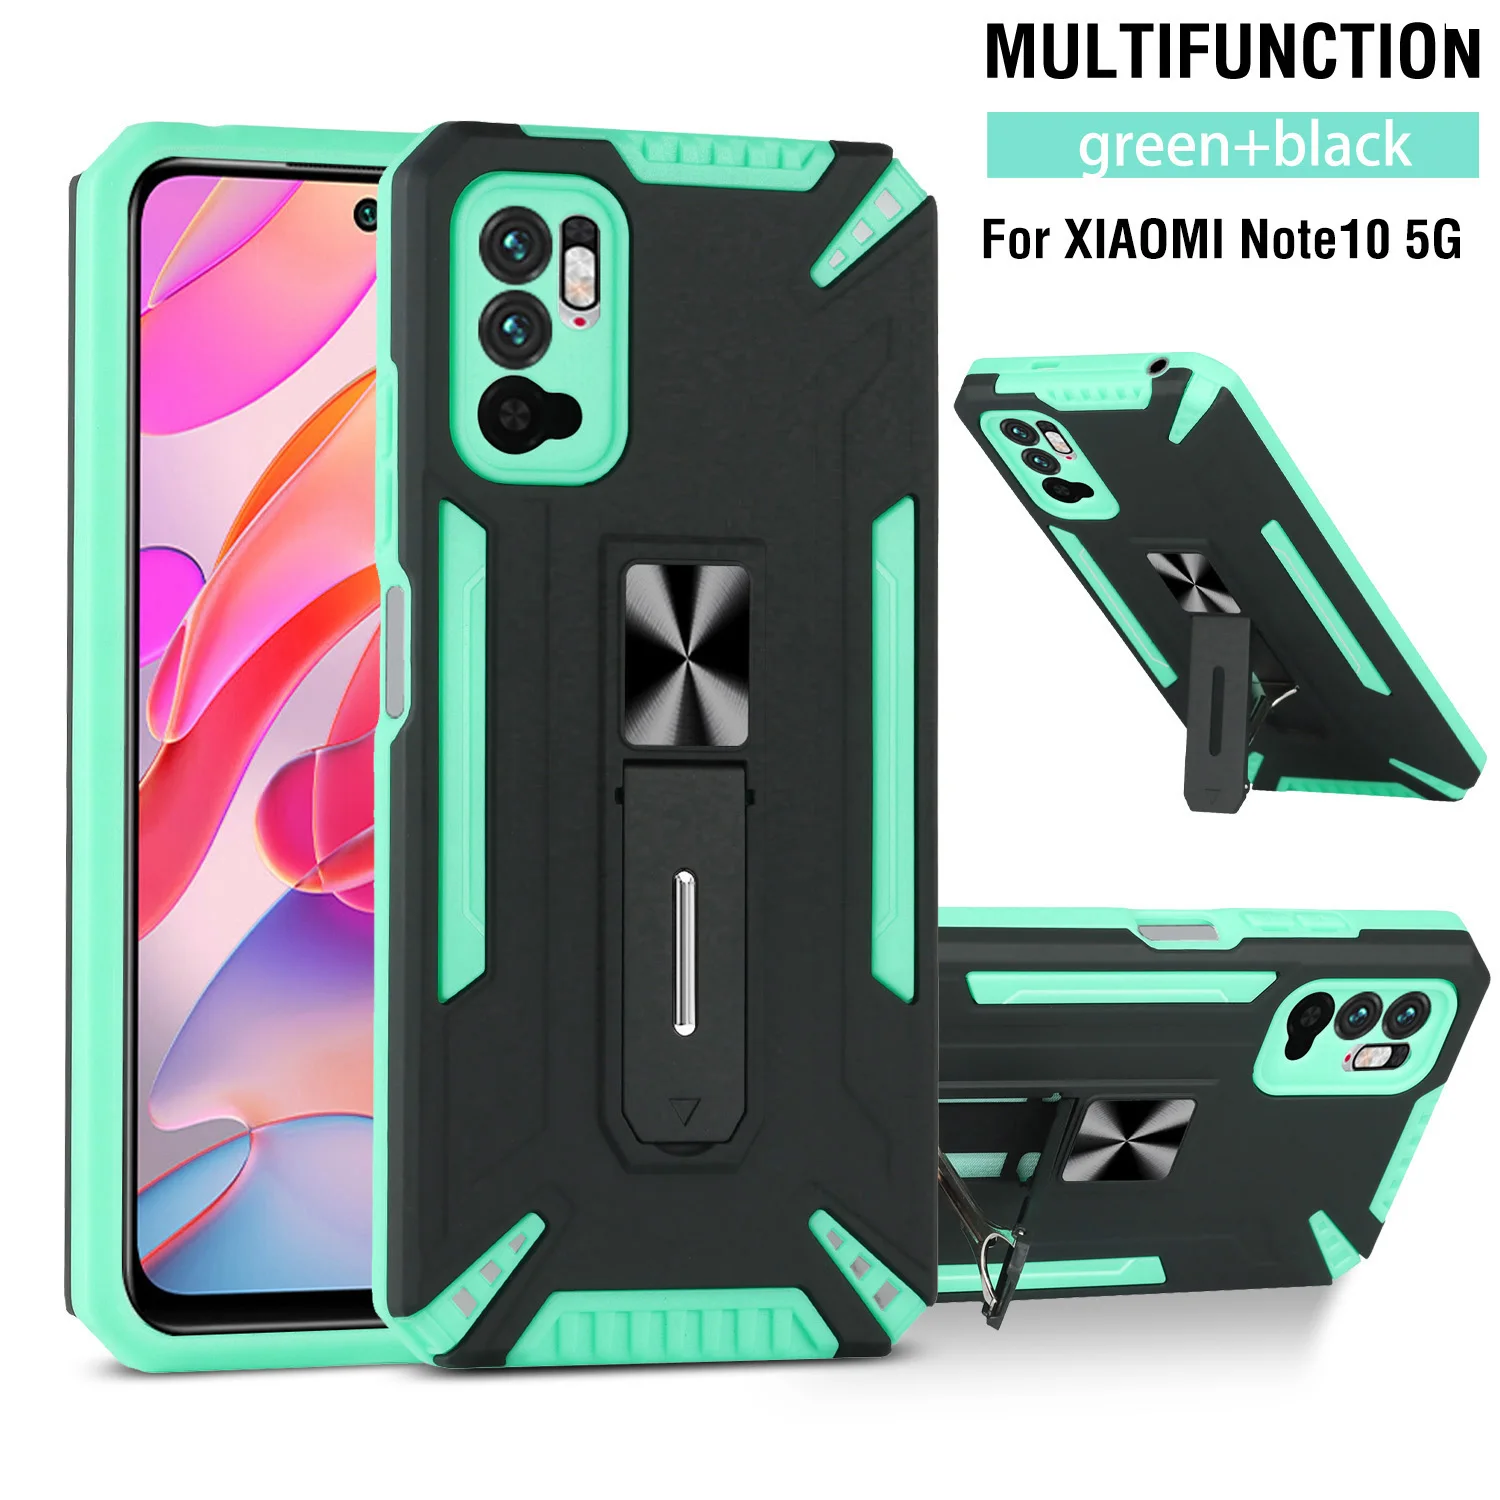 

Shockproof Armor Kickstand Case For Xiaomi Redmi 8 8a note9 note9t note9pro note10 pro note8 Finger Magnetic Ring Holder Cover